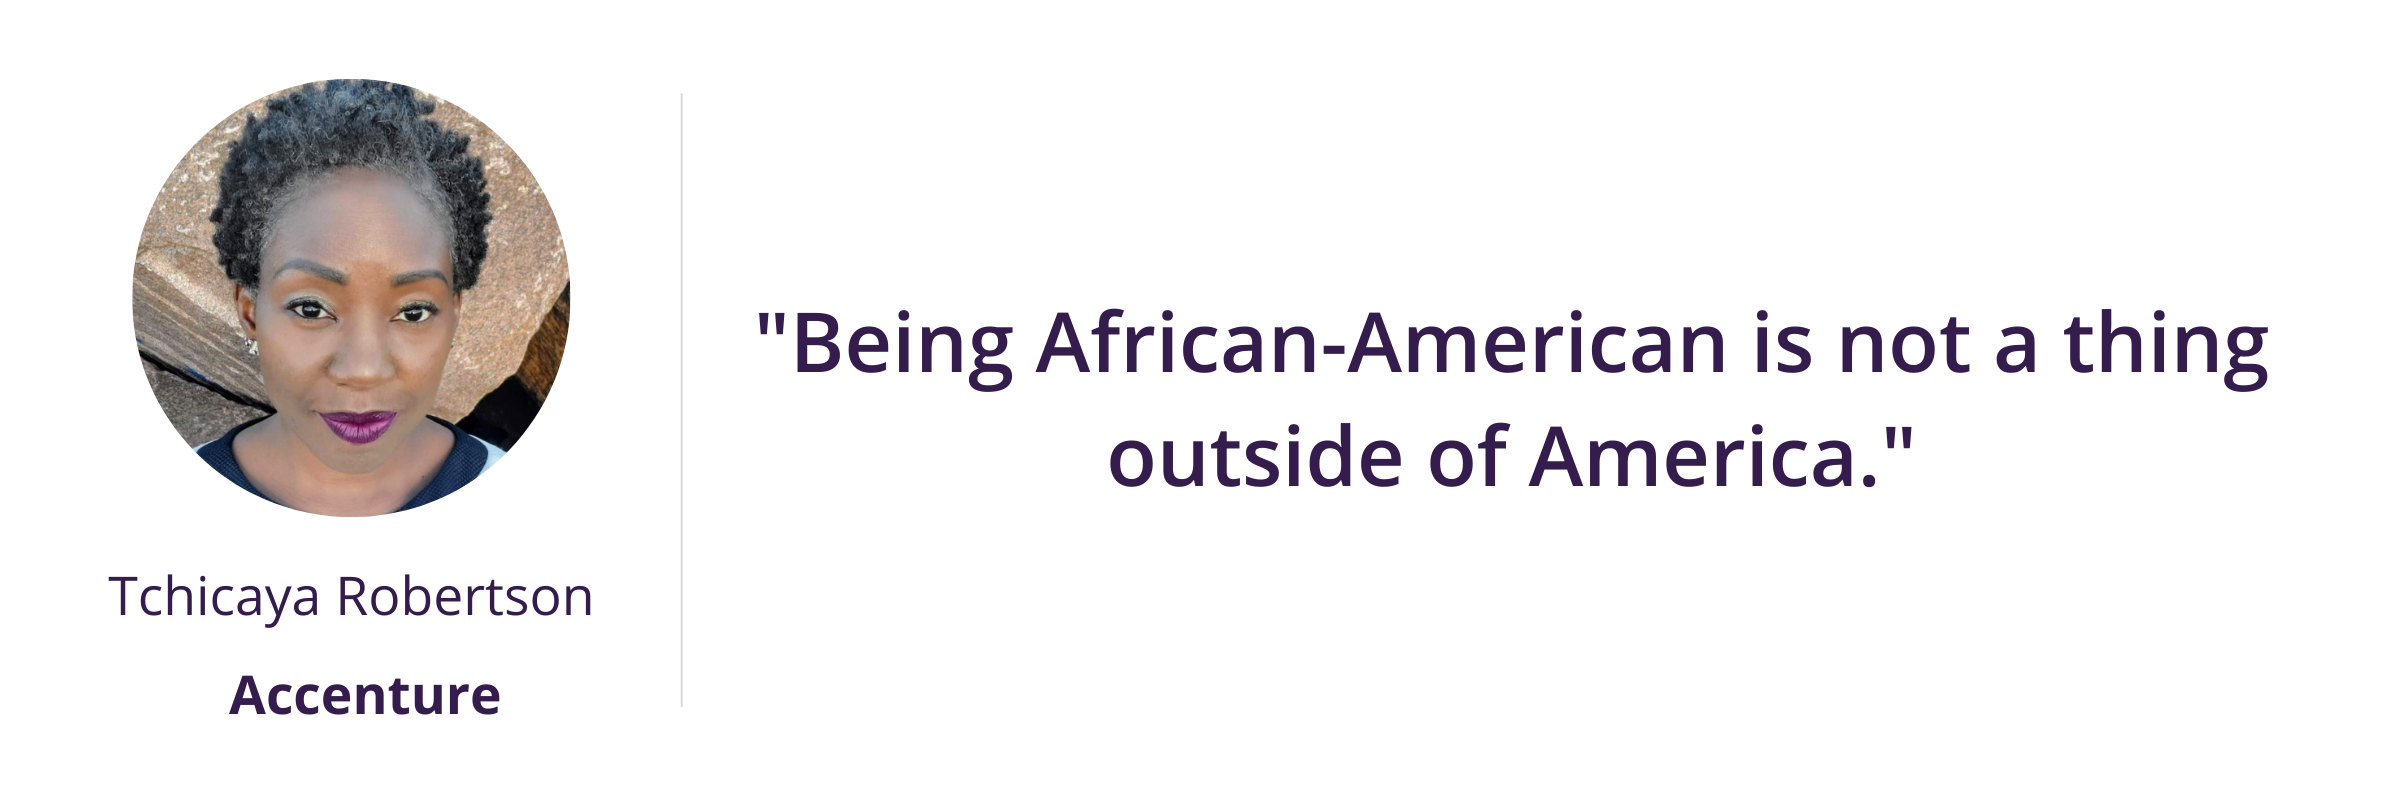 Being African-American is not a thing outside of America.